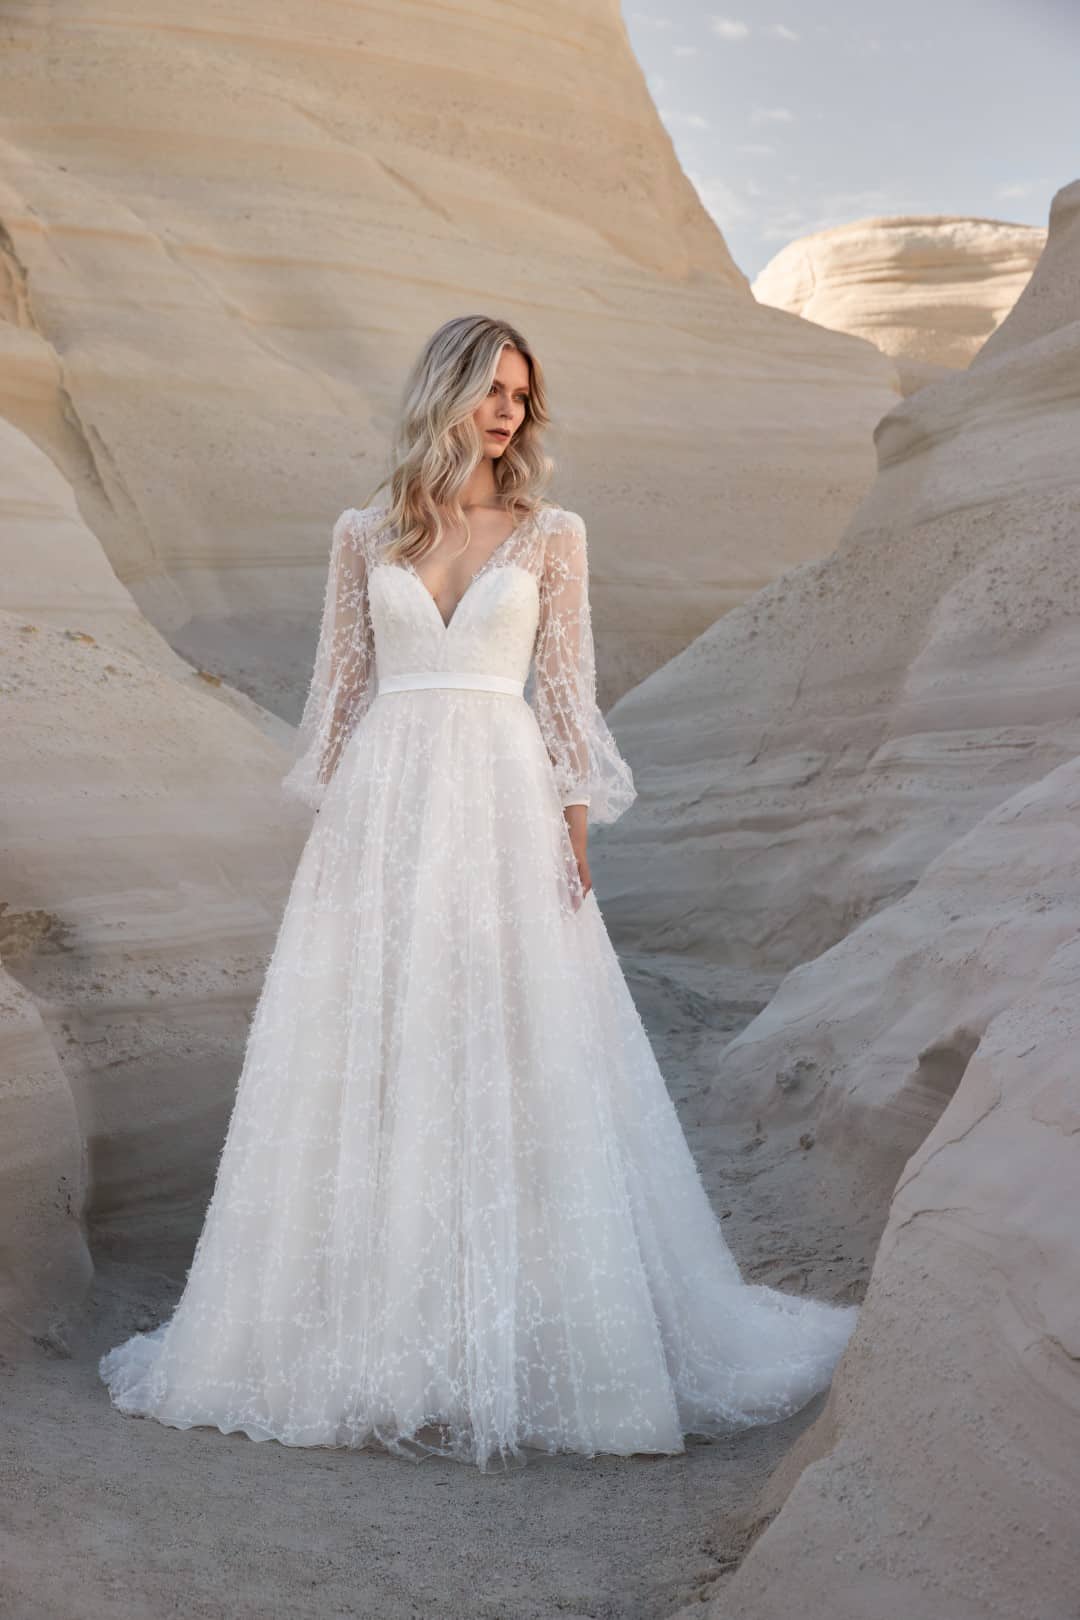 Sassi Holford Iris bow tulle wedding dress balances modernity with femininity, resulting in an endlessly flattering silhouette. Shop for your wedding dress at Your Dream Bridal Boston.